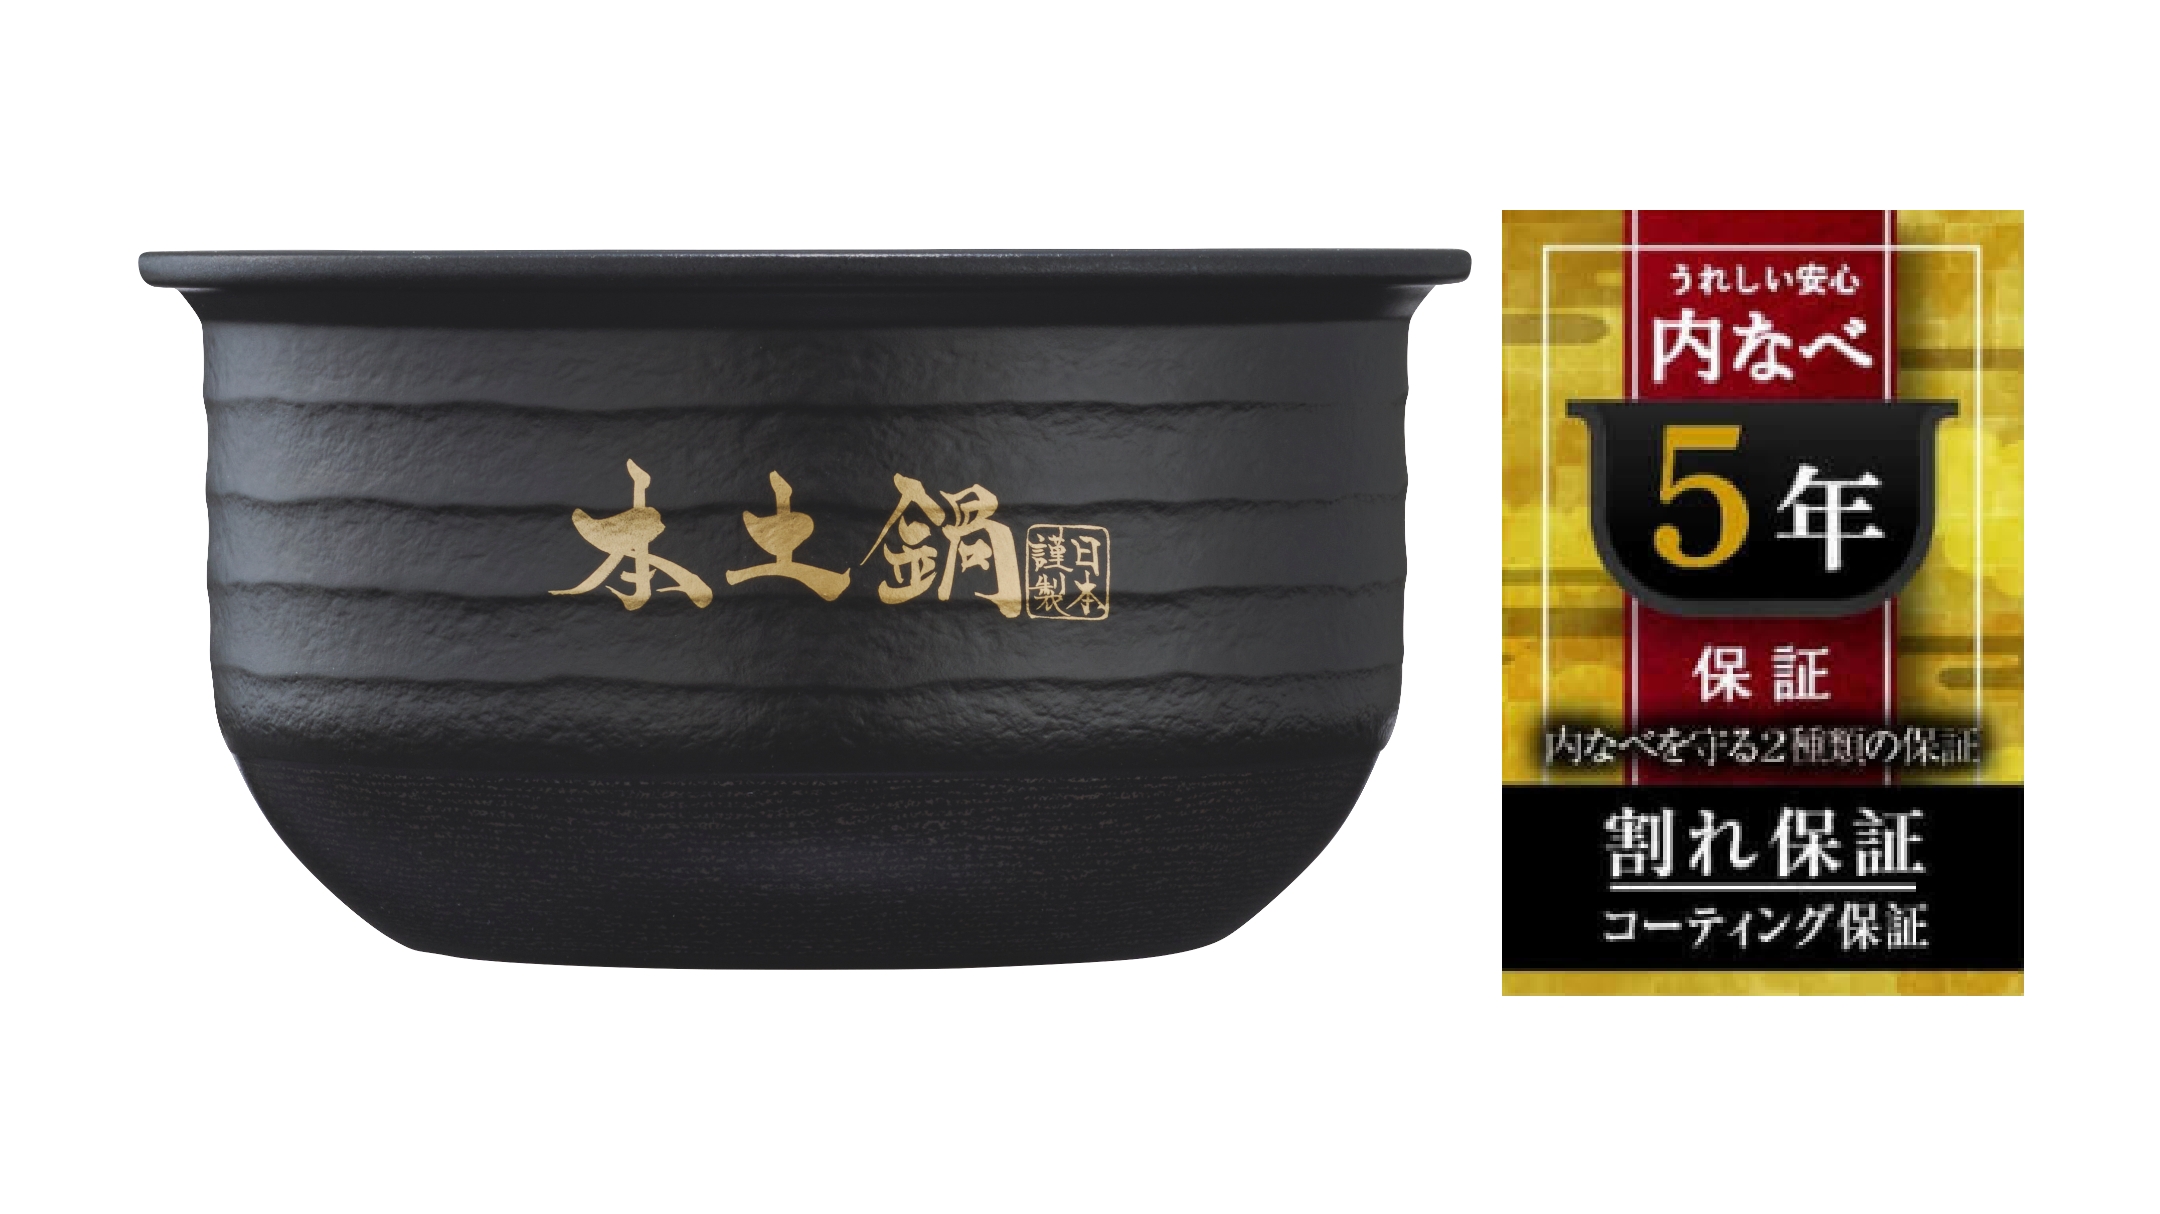 Two types of warranties to protect the inner pot (authentic donabe)